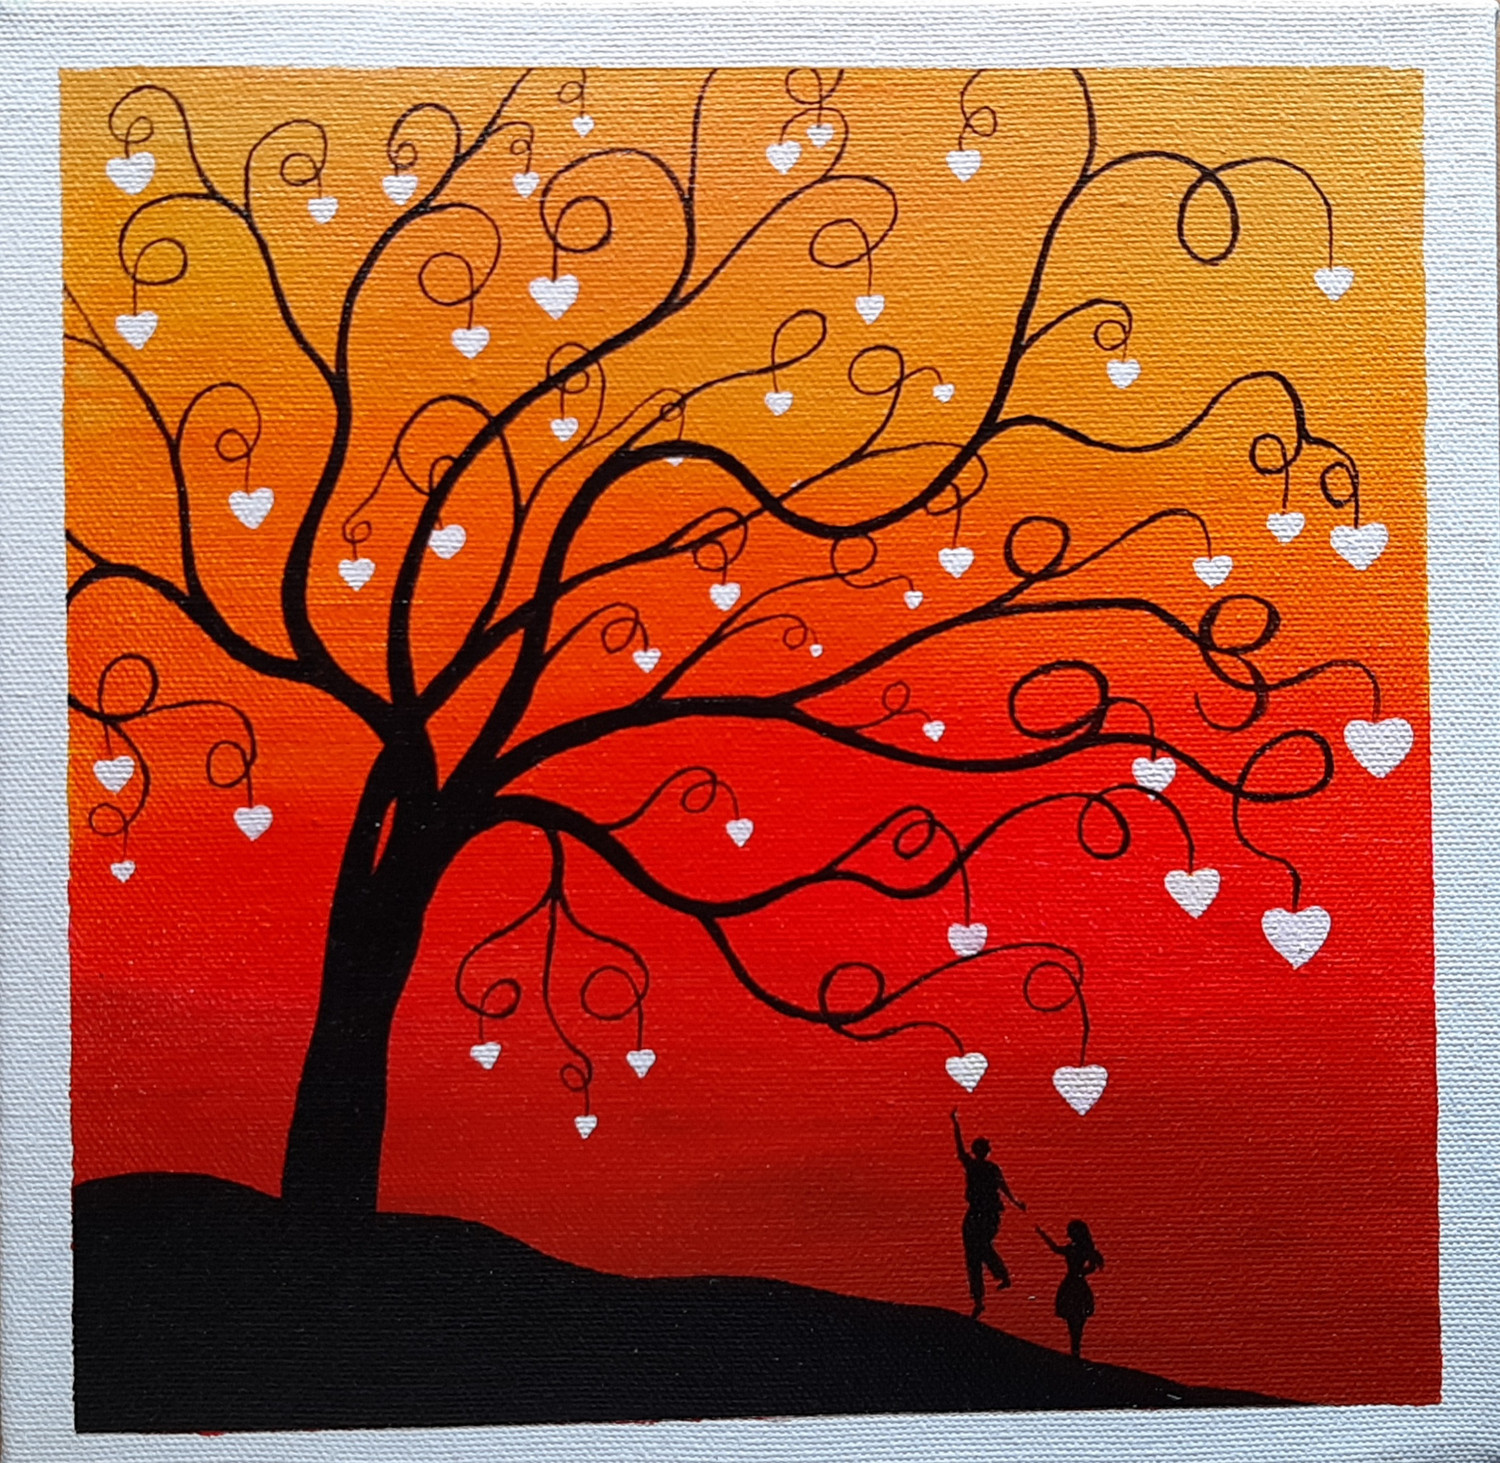 Buy LOVE Heart Tree Acrylic Painting on Canvas Handmade Painting by SUBHAM  GHOSH. Code:ART_2825_59454 - Paintings for Sale online in India.